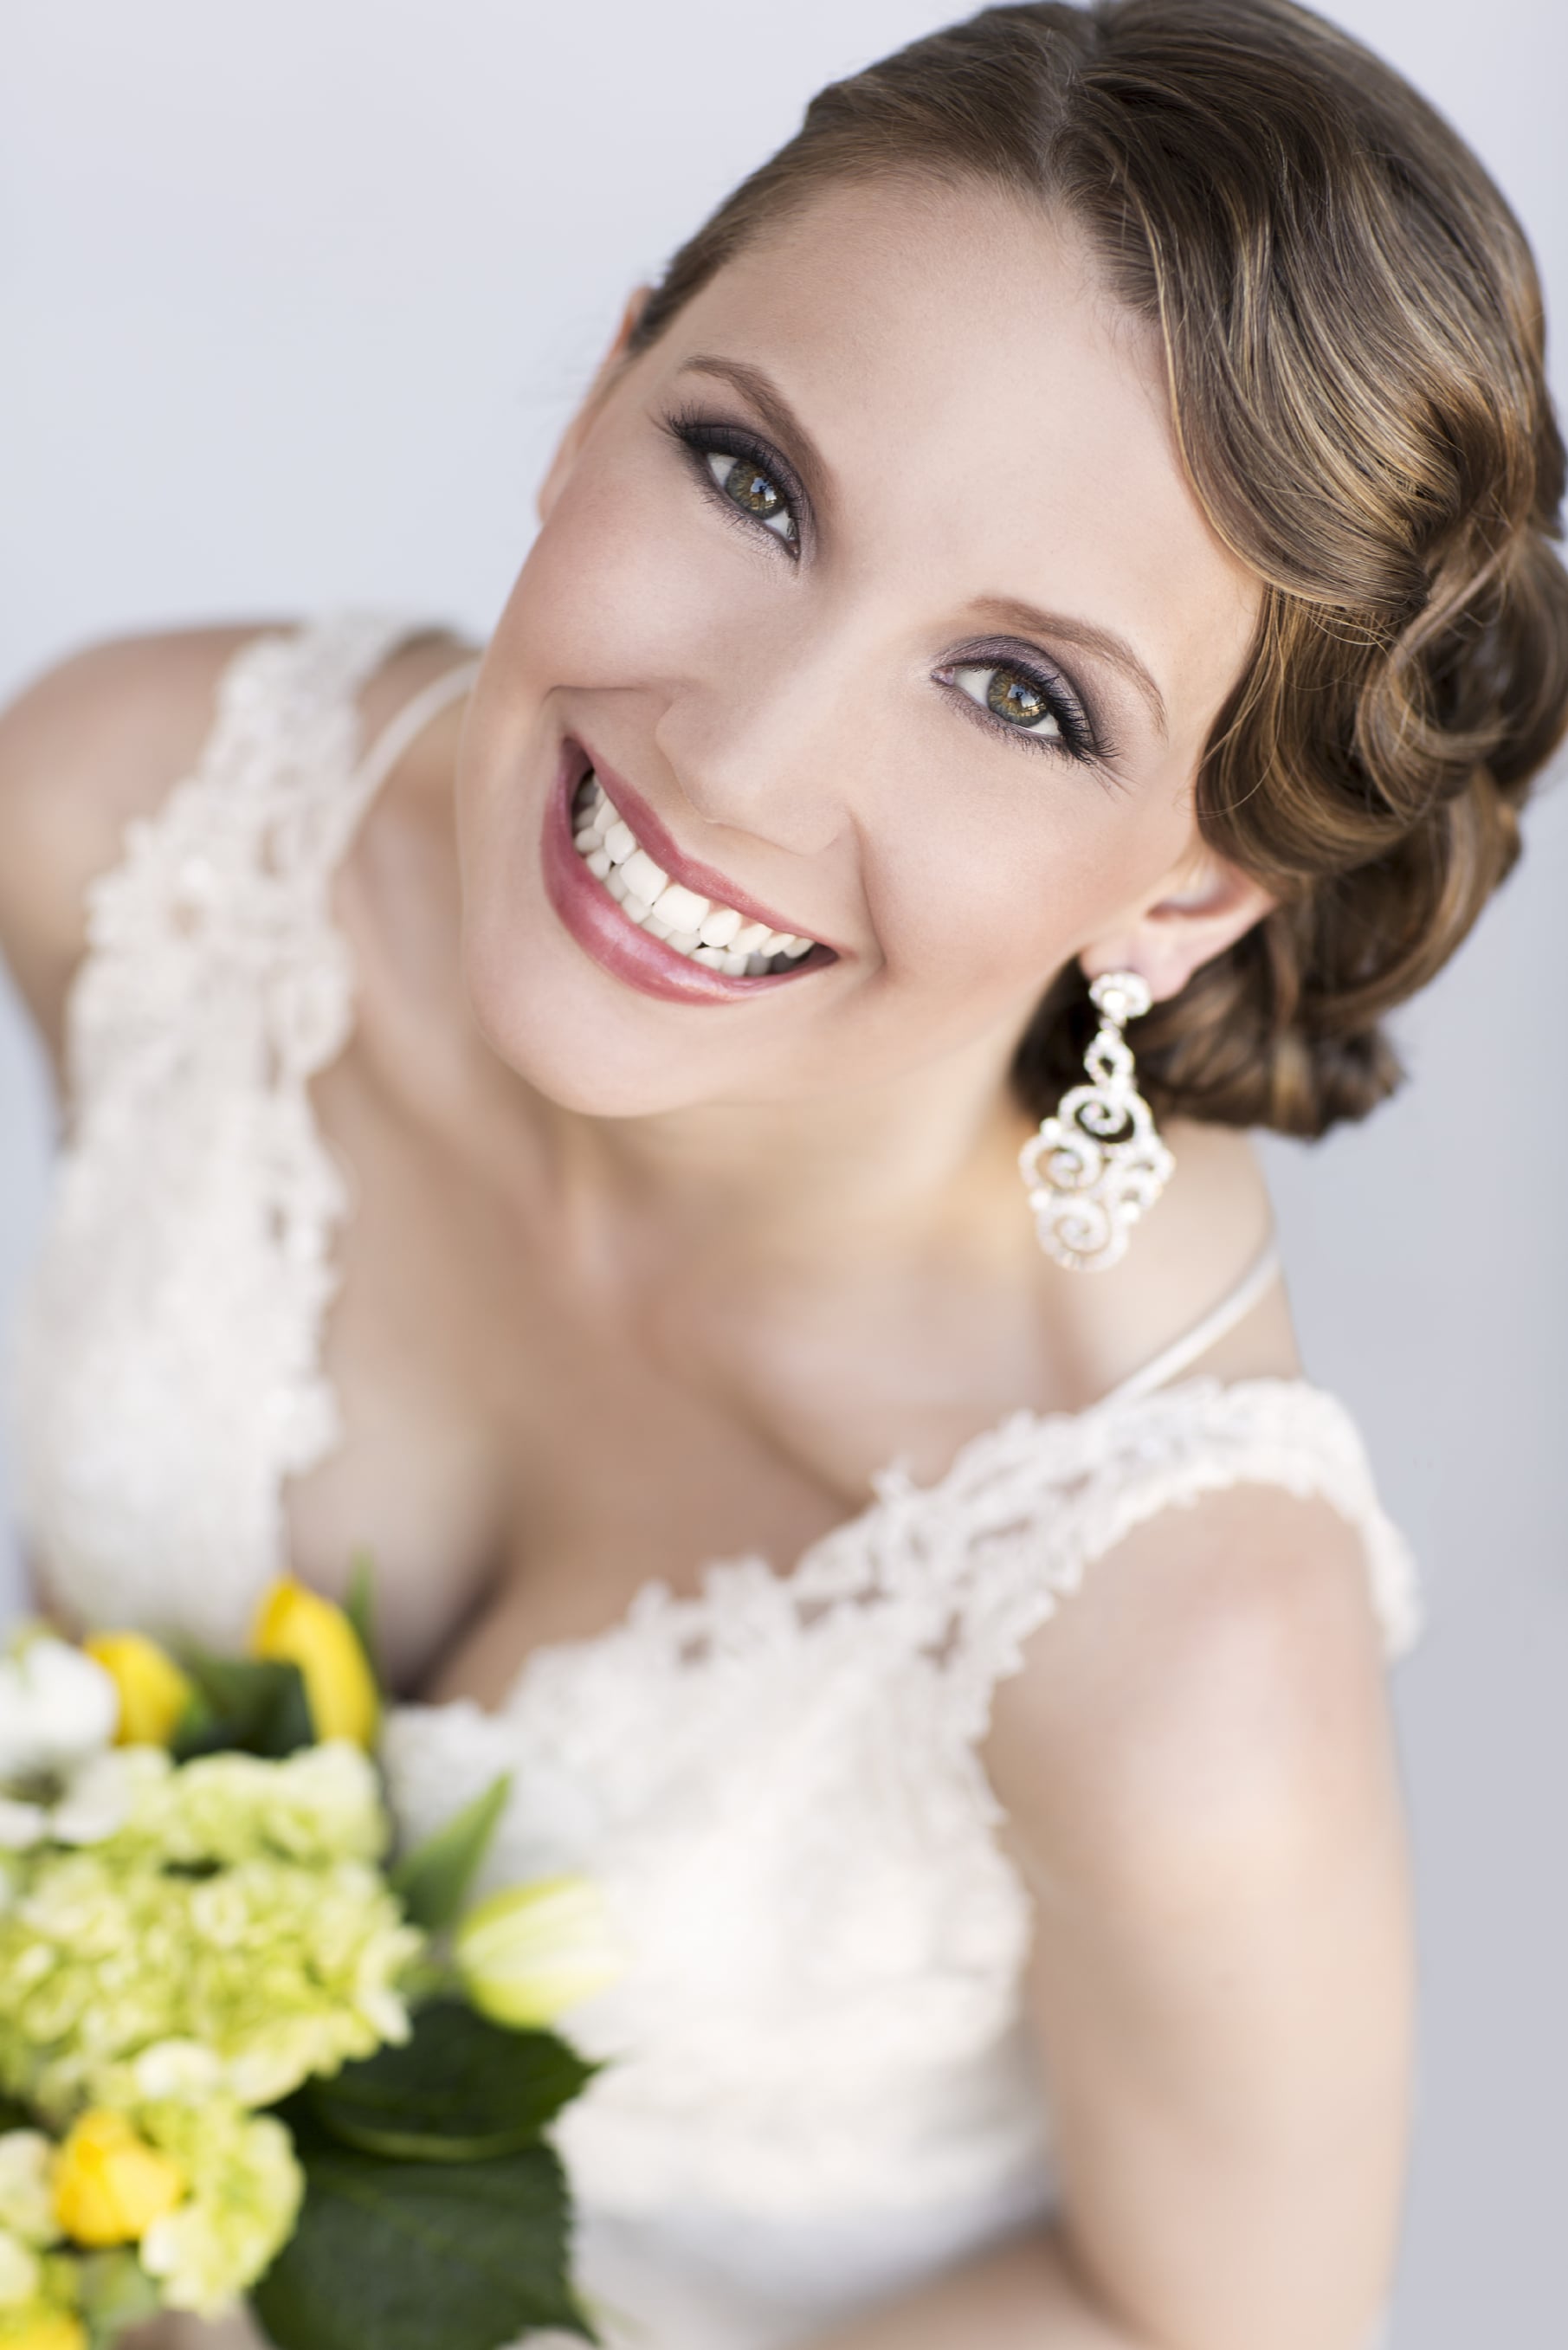  Our patients have ample time to prepare for their BIG DAY with Invisalign. 